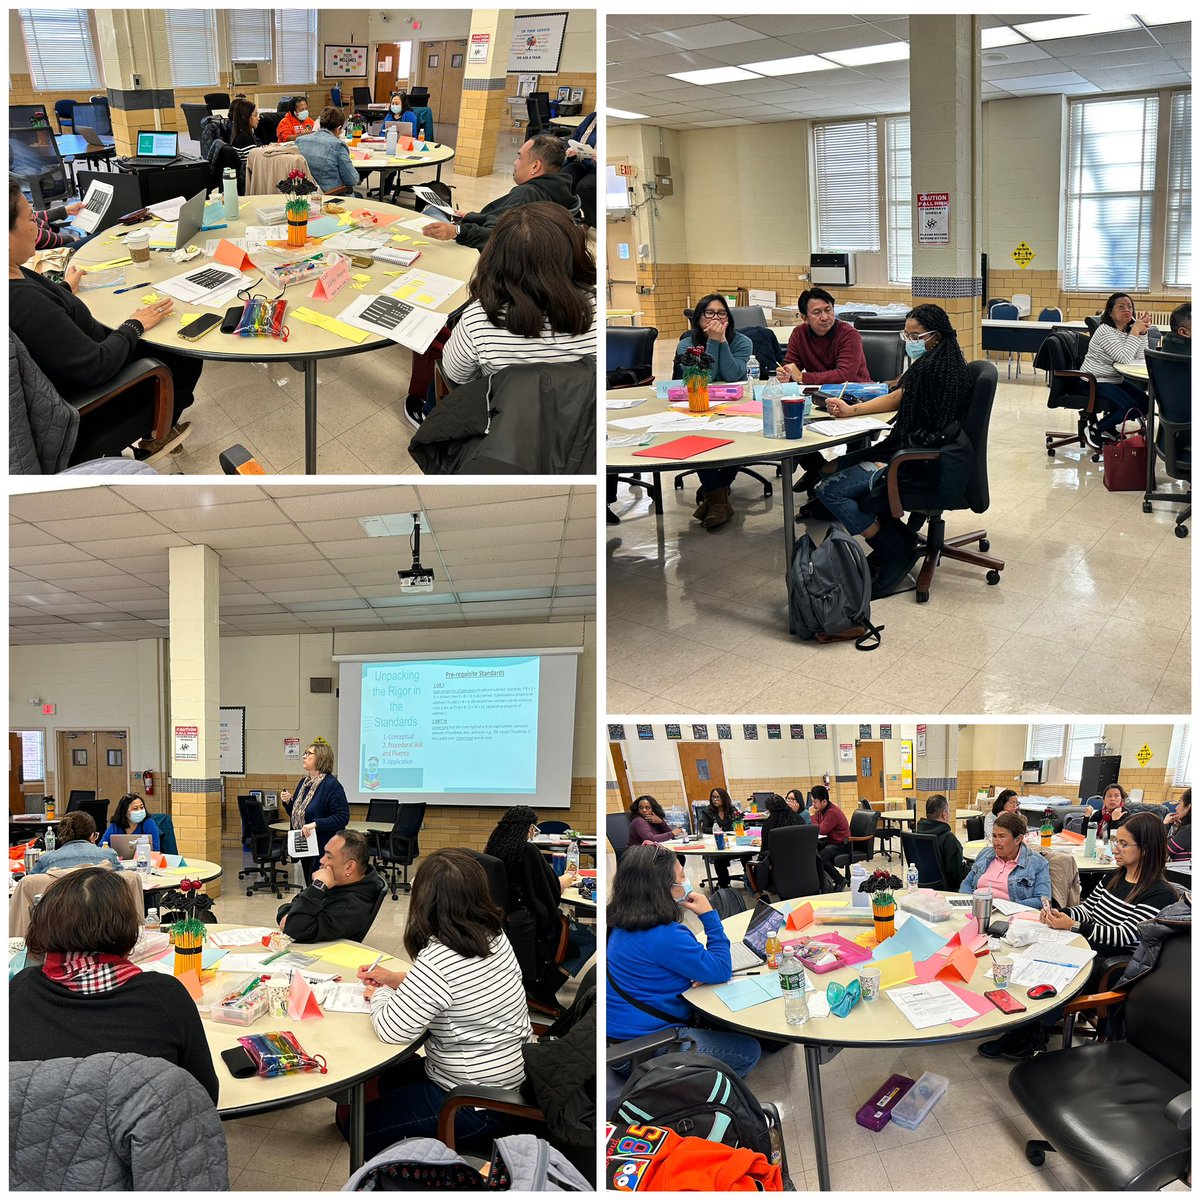 Another AMAZING Saturday math session! Grade 2 teachers deepening their understanding of place value & inequalities w/concrete tools to support implementation of Unit 2.7.
@NTNMATH @PGCPSCurriculum